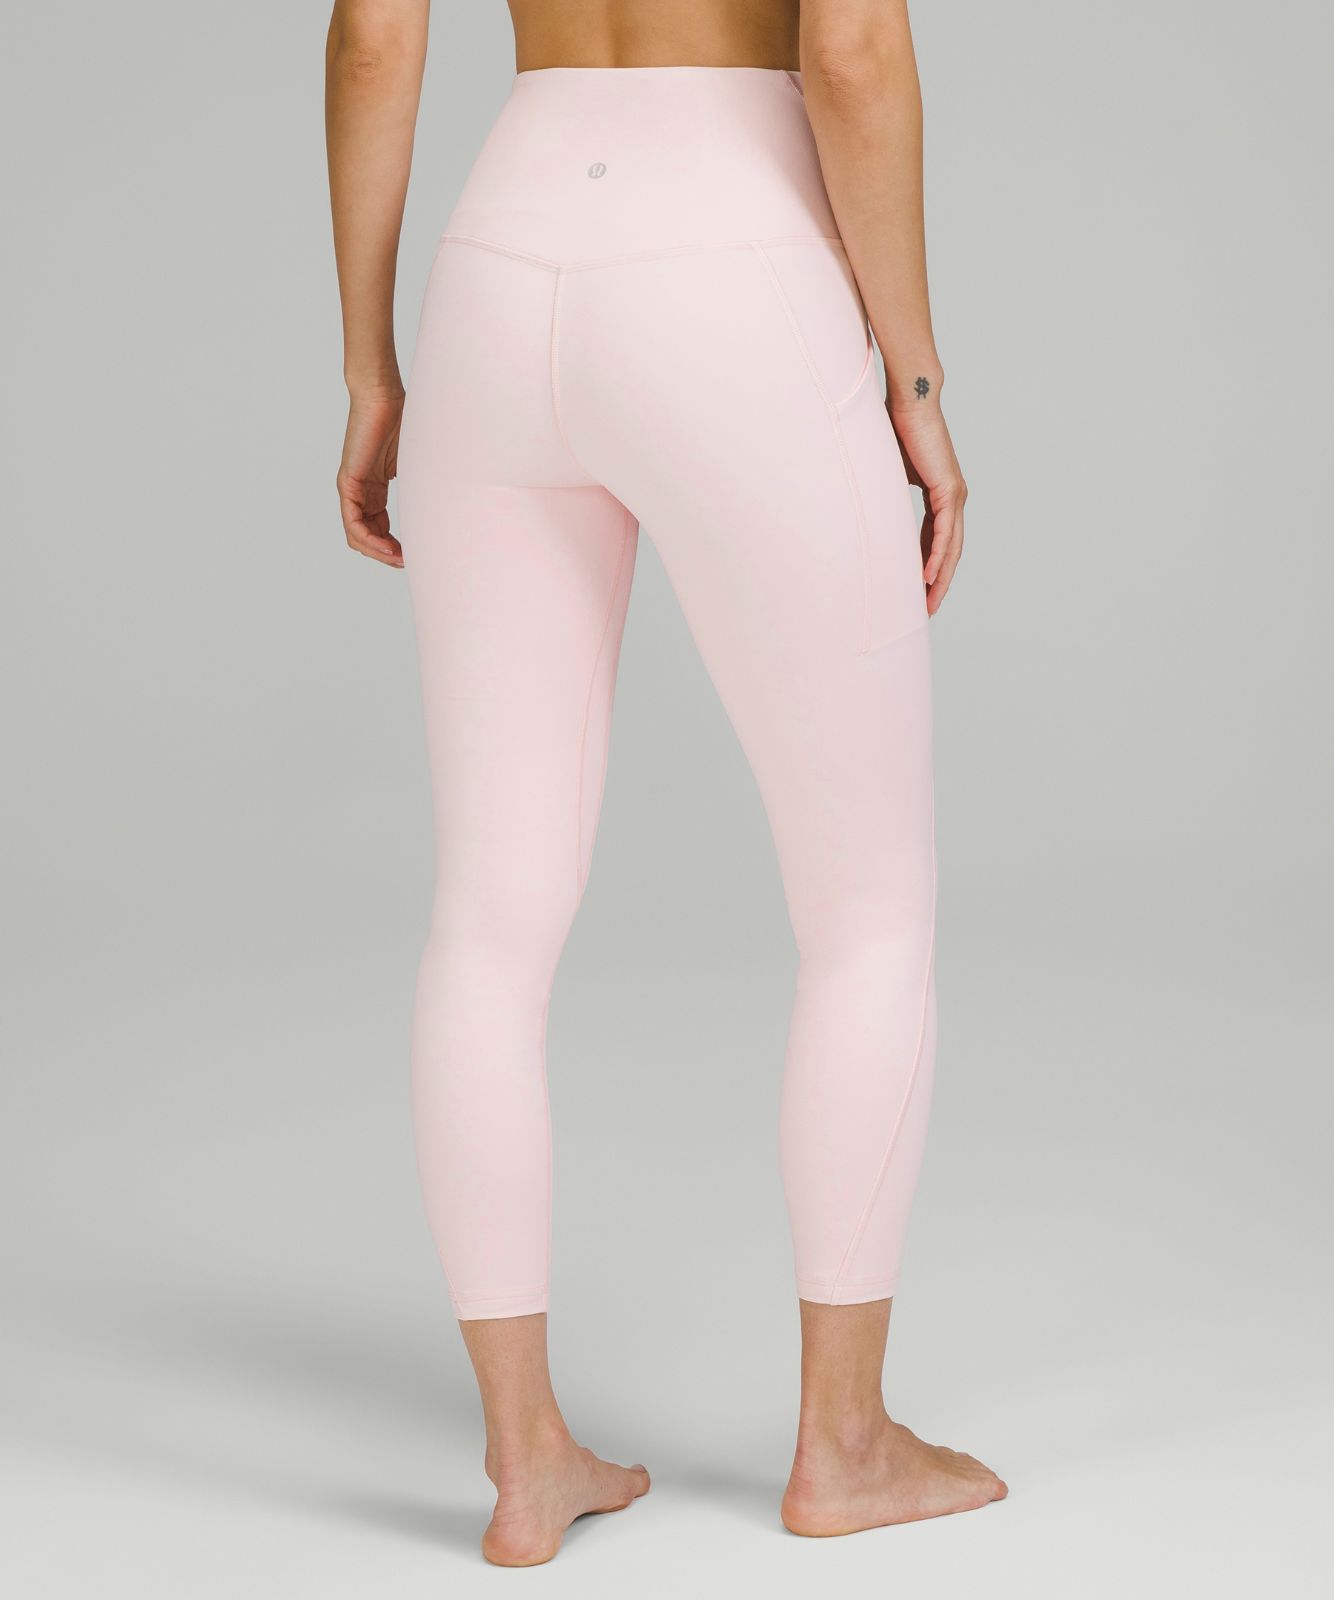 Lululemon Align Leggings Asia Fit Size M Pink Puff, Women's Fashion,  Activewear on Carousell